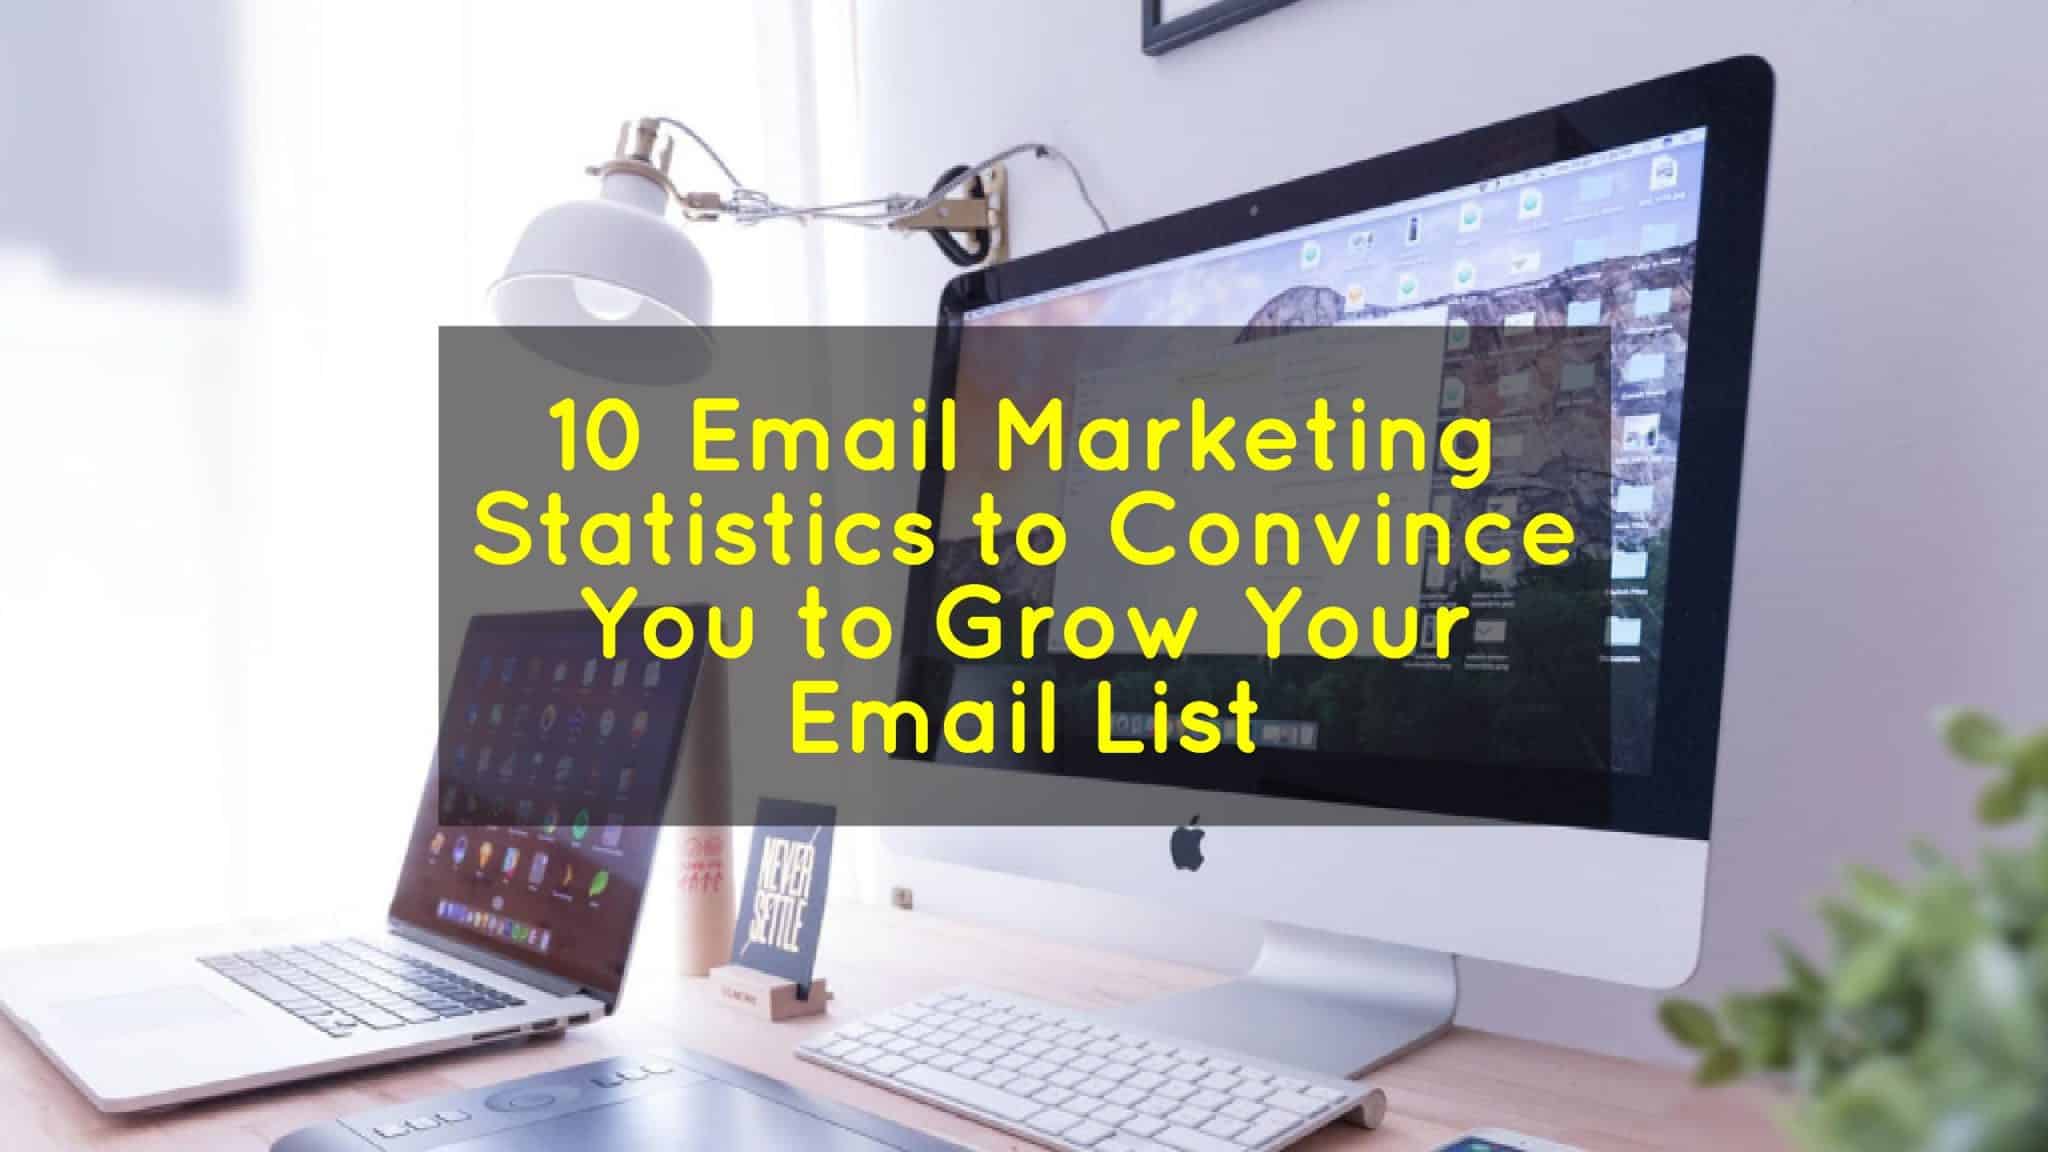 10 Email Marketing Statistics to Convince You to Grow Your Email List